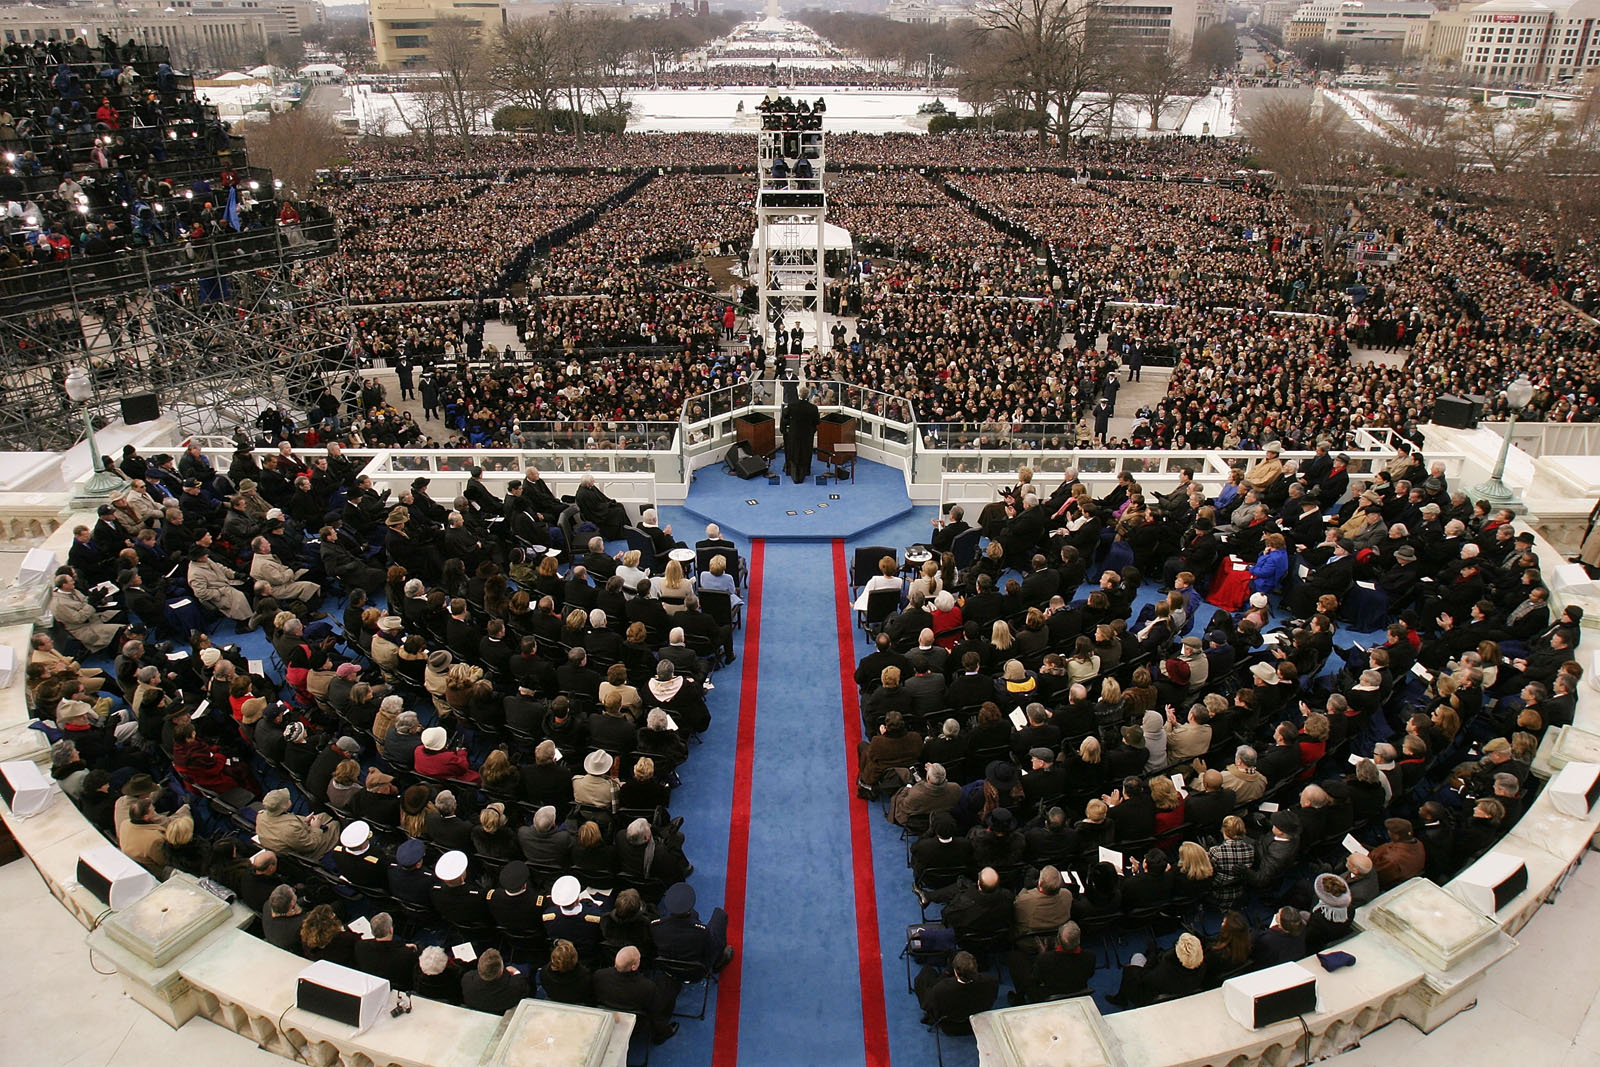 WASHINGTON - JANUARY 20:  U.S. President George W. Bush delivers his inaugural address after taking the oath of office for his second term during ceremonies on the west front of the U.S. Capitol January 20, 2005 in Washington, D.C. Bush?s address outlined his plans to pursue freedom around the world and push a legacy-setting agenda at home championing ?freedom in all the world? as the surest path to peace.  (Photo by Shaun Heasley/Getty Images)